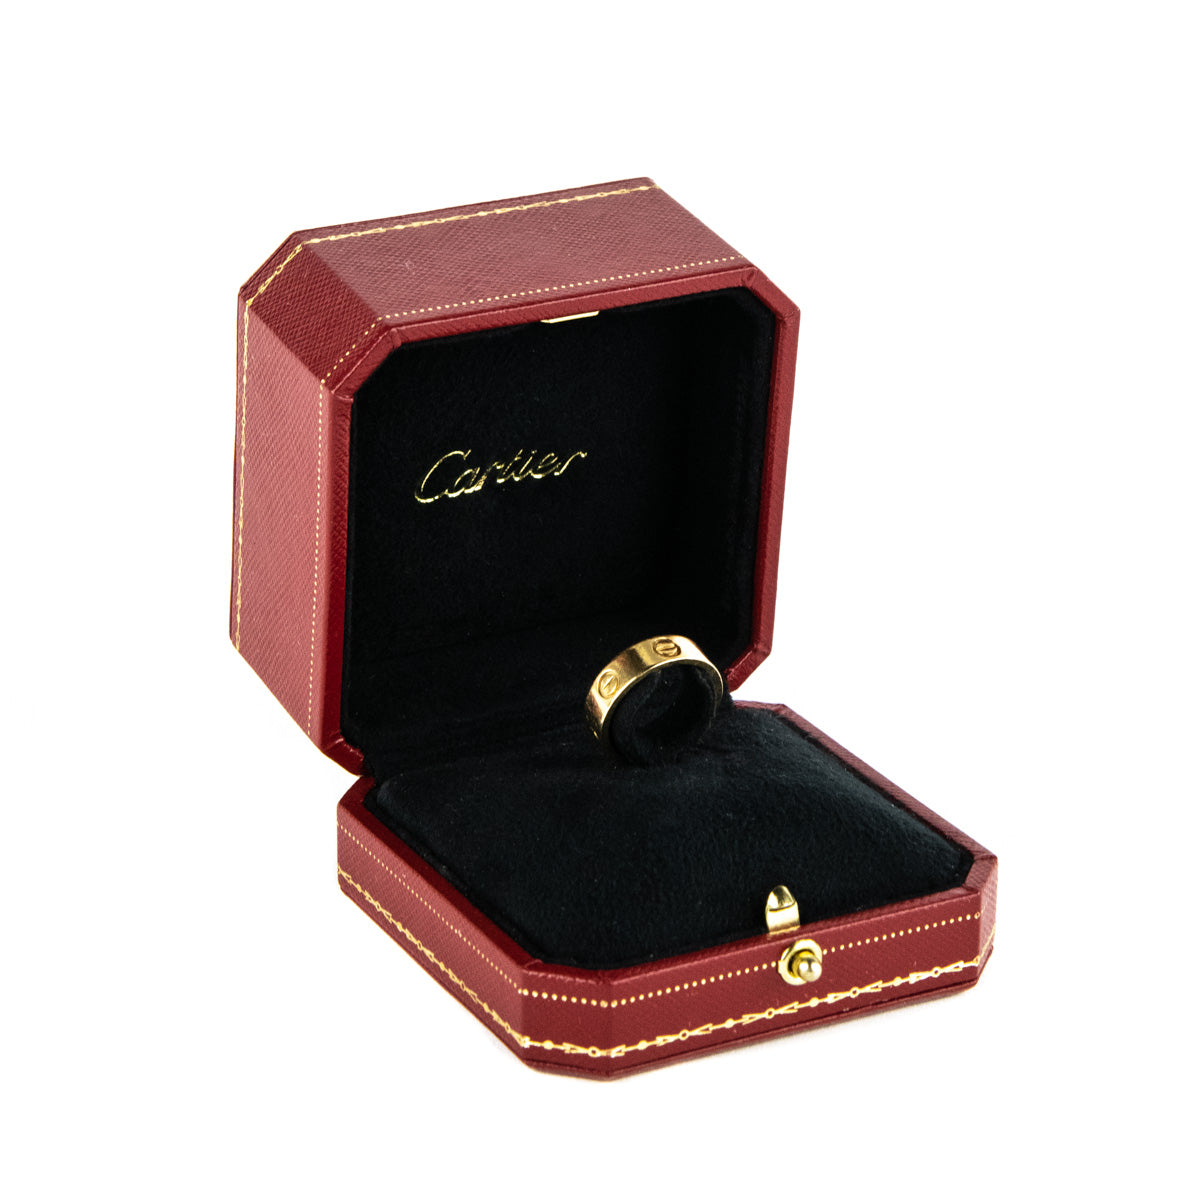 Cartier 18K Yellow Gold Love Ring Band Size 6.25 - Love that Bag etc - Preowned Authentic Designer Handbags & Preloved Fashions